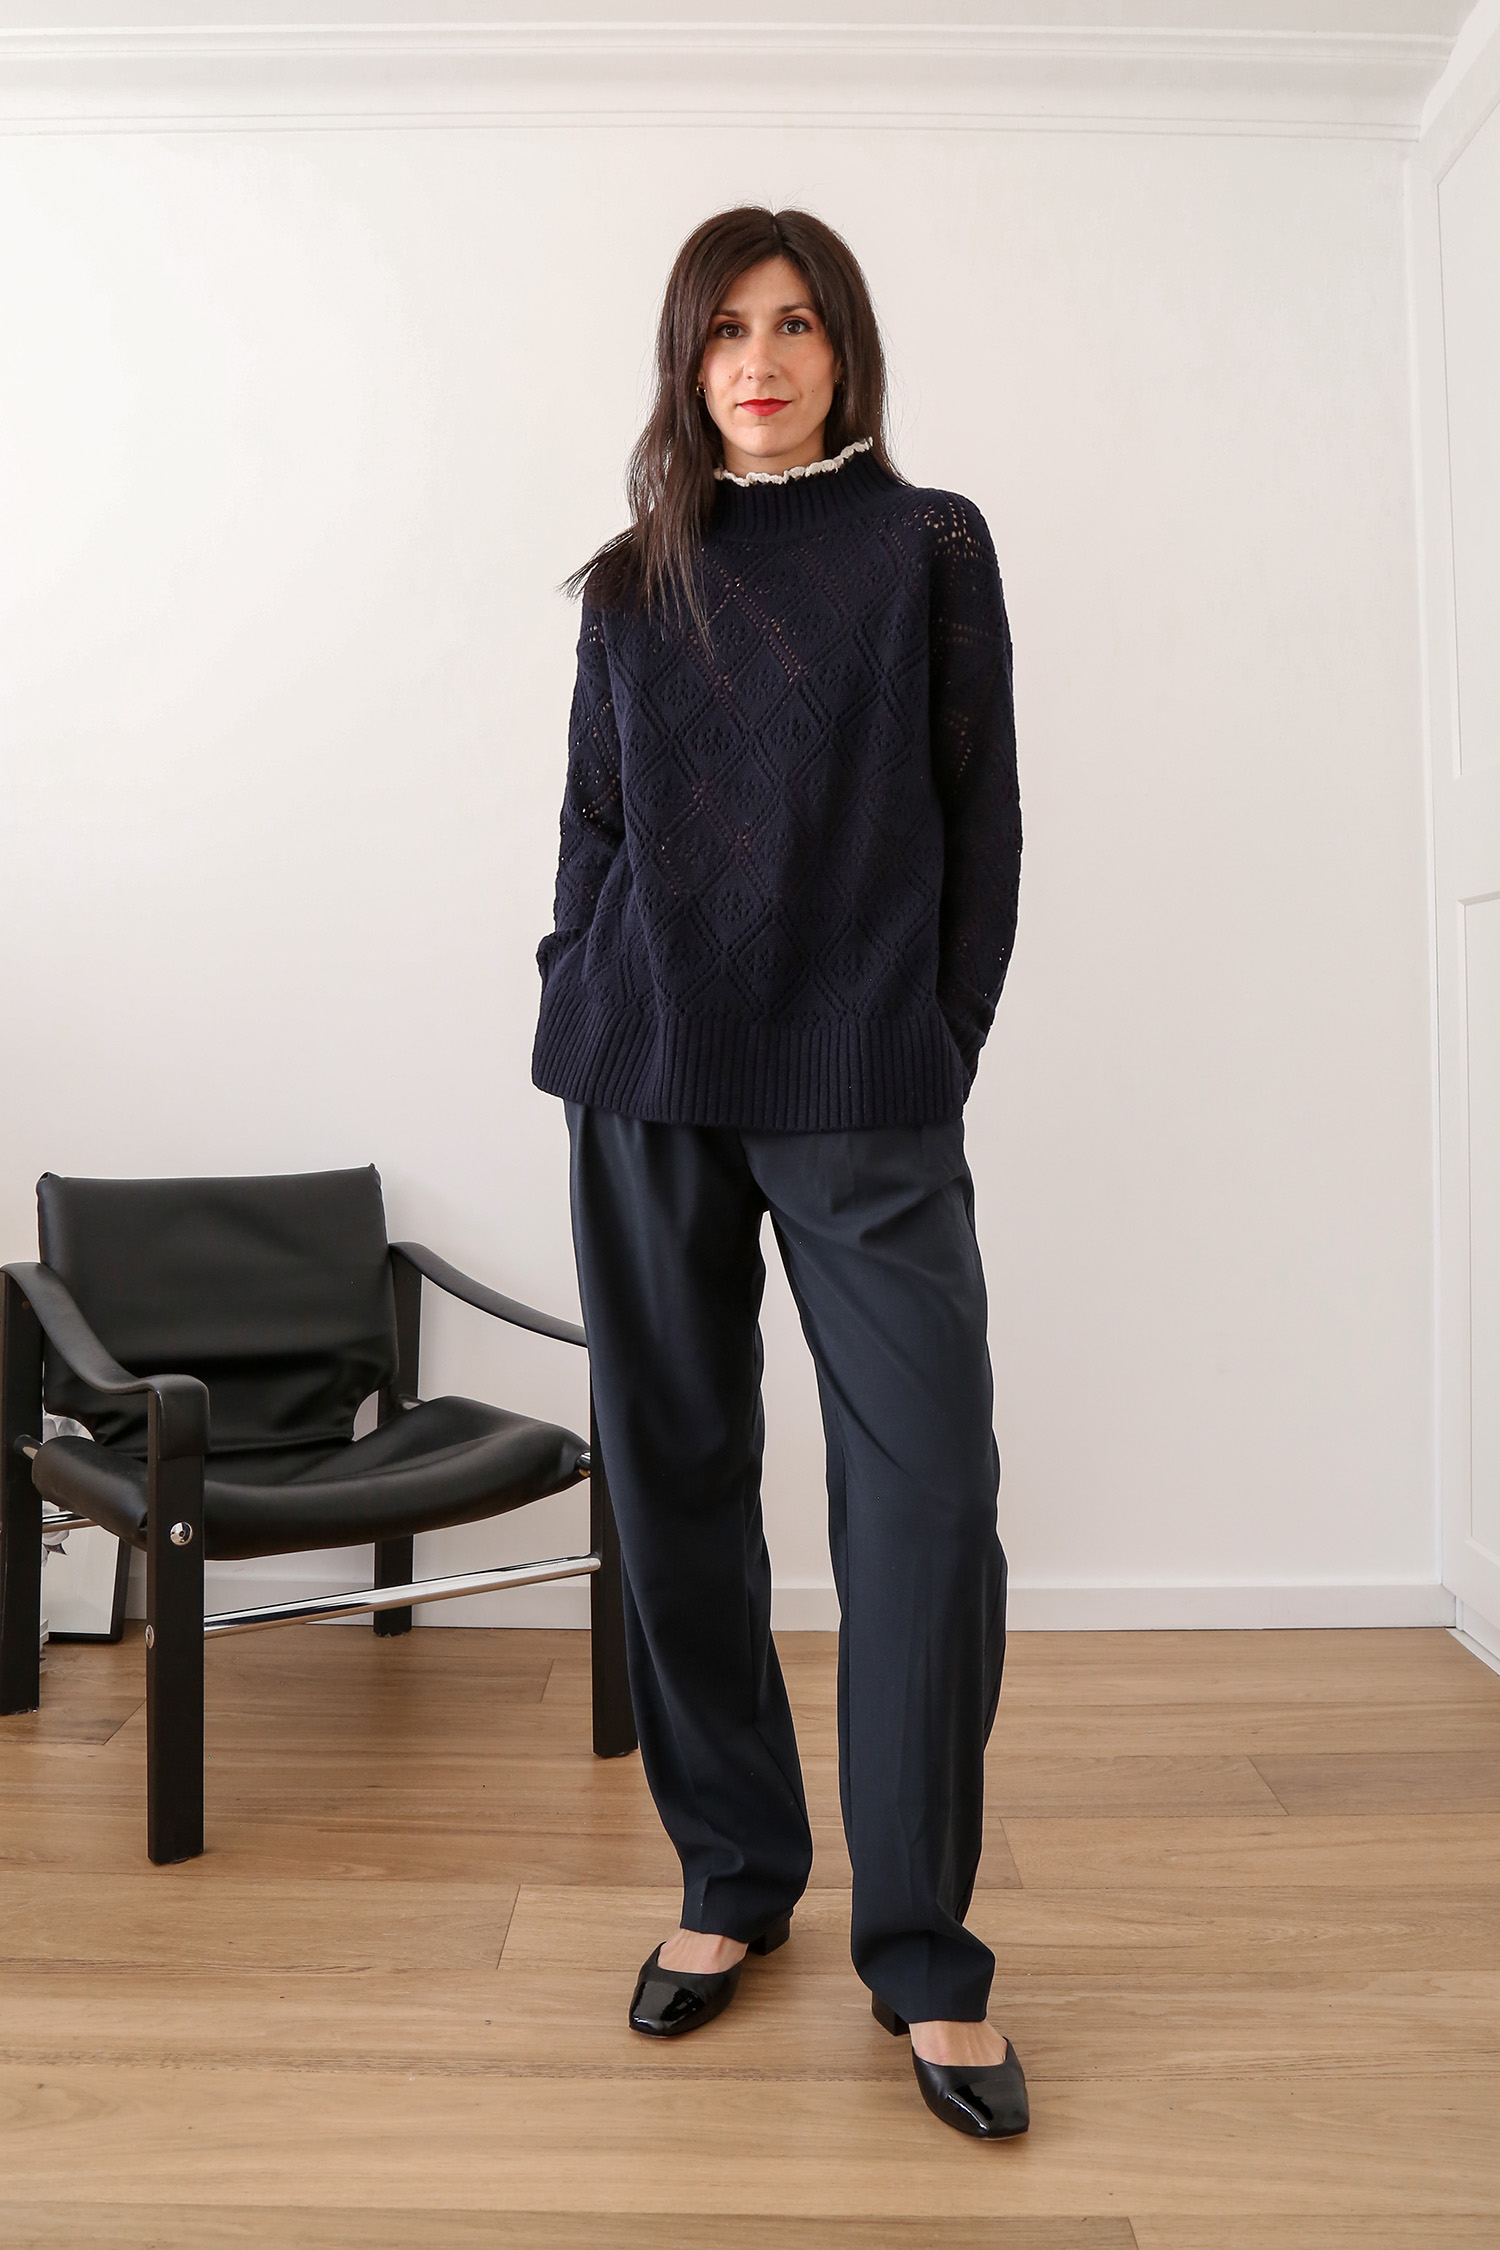 Sezane Laurie Jumper review